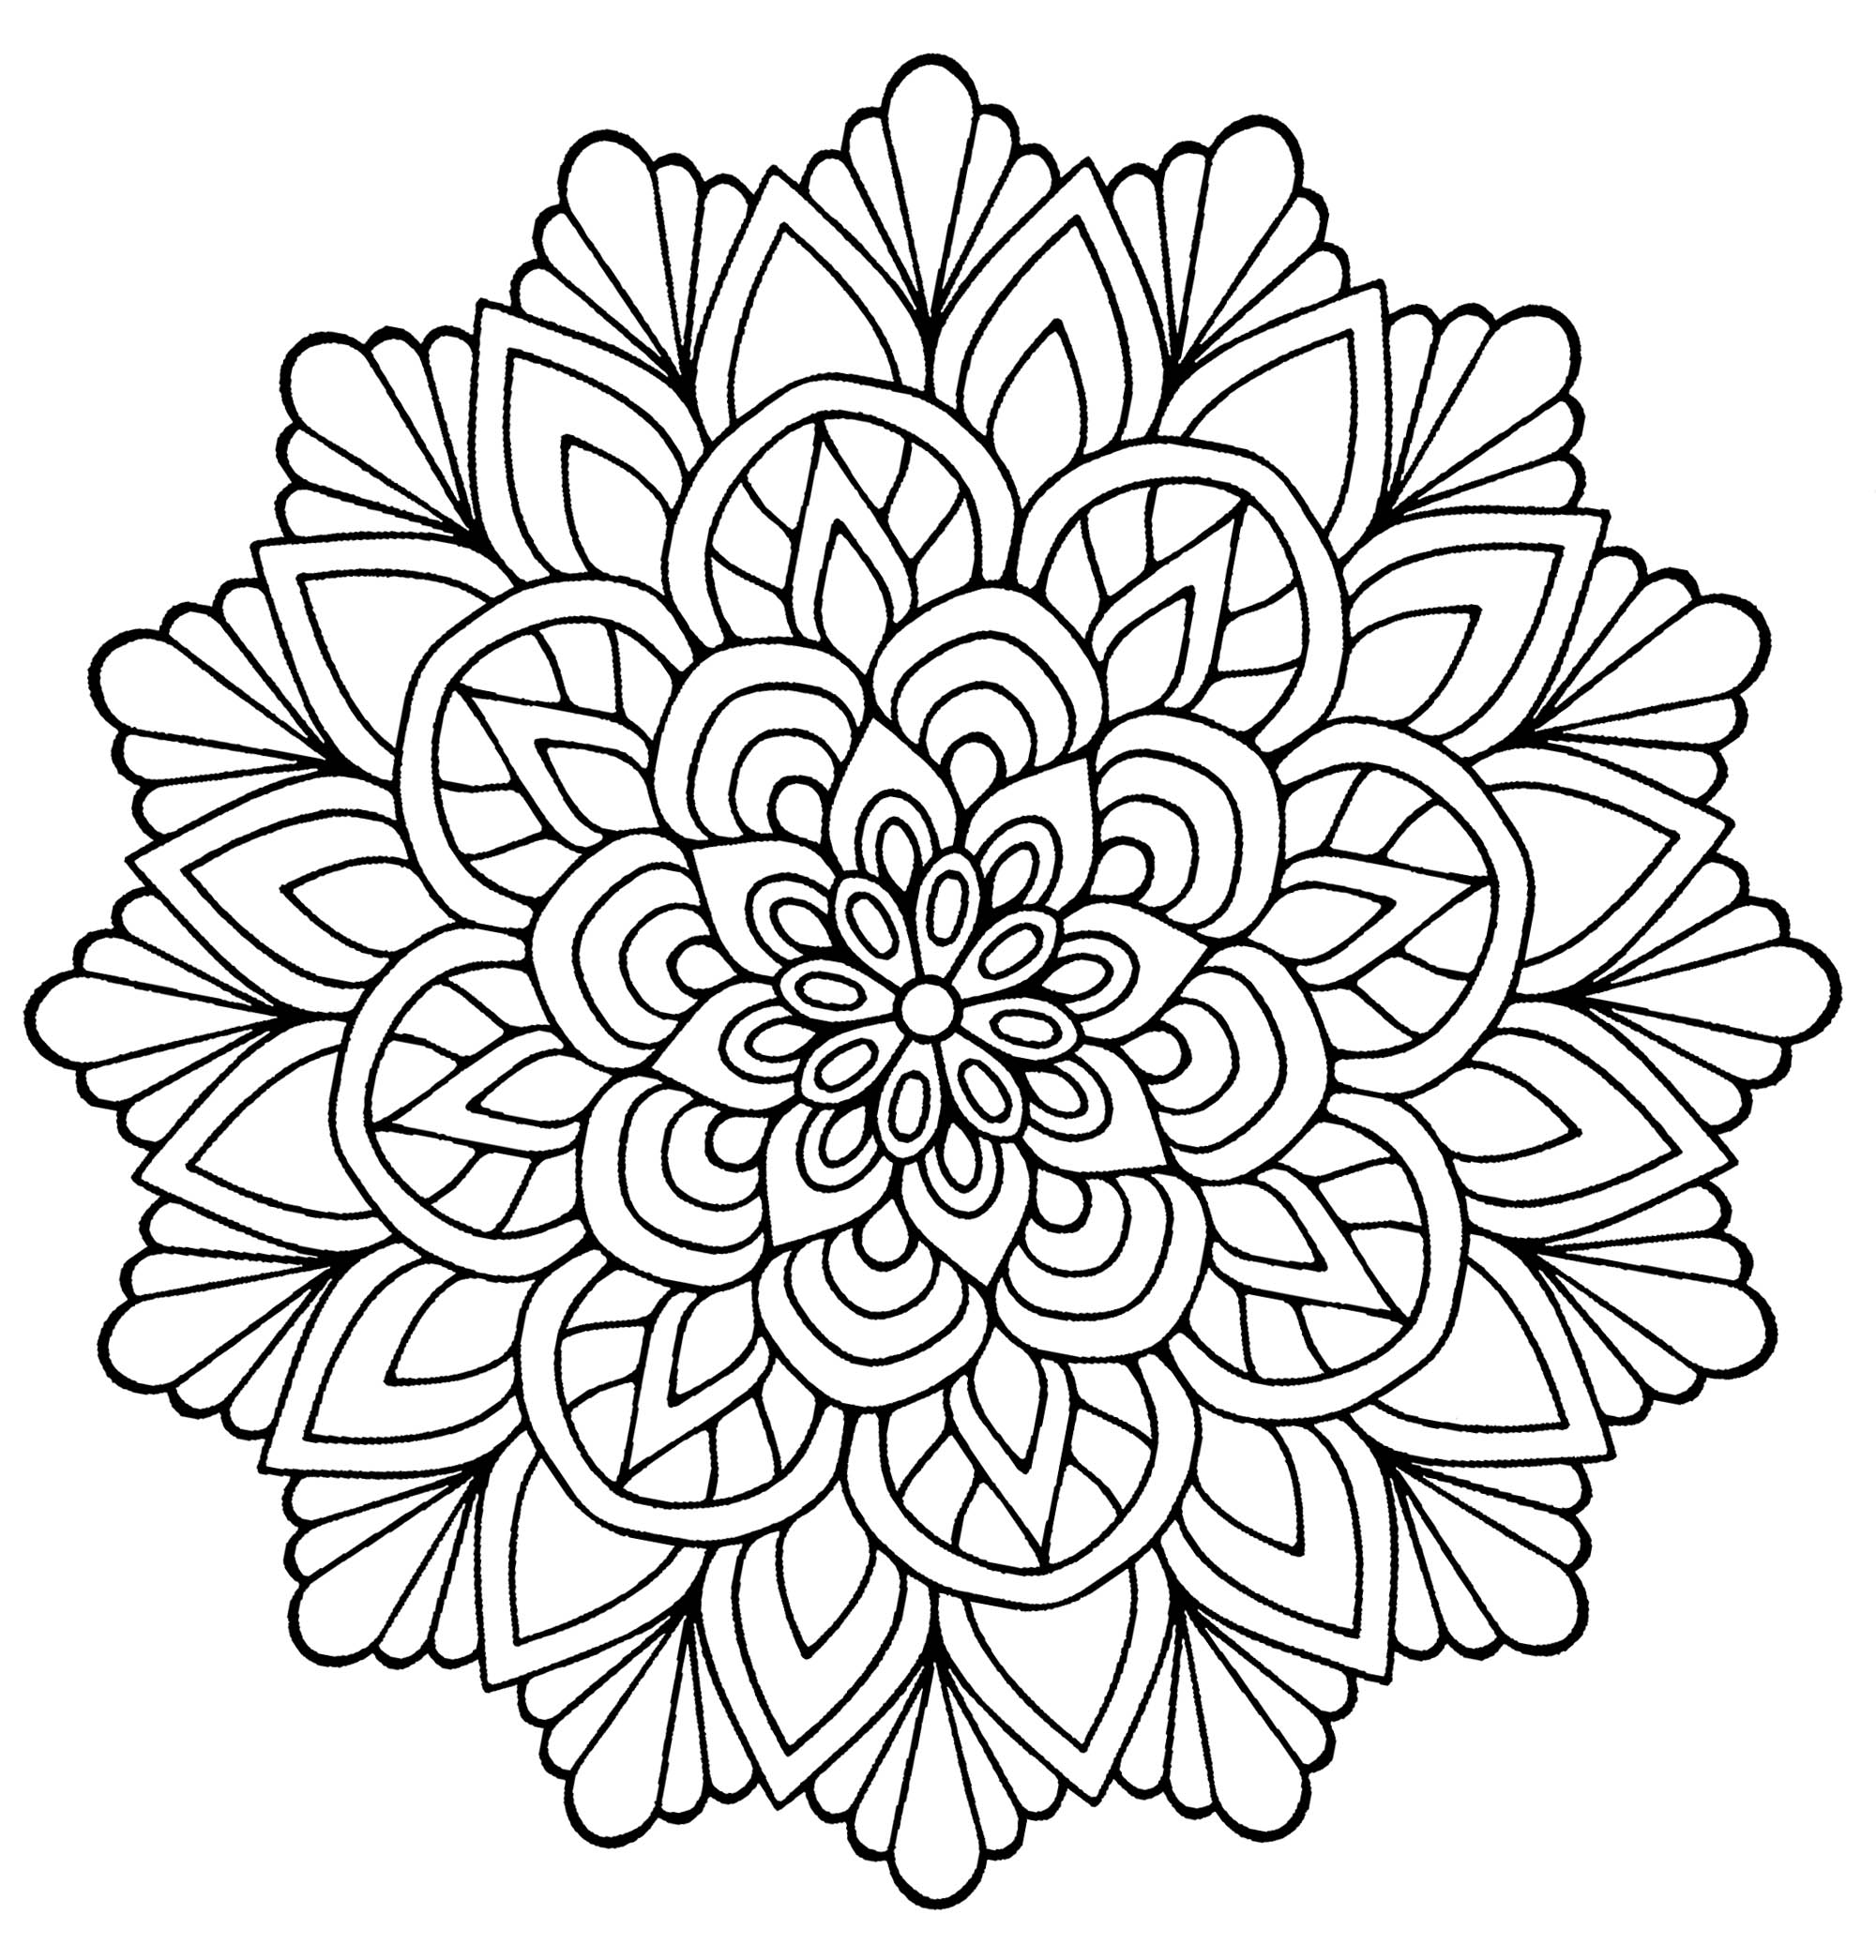 Mandala flower with leaves Malas Adult Coloring Pages